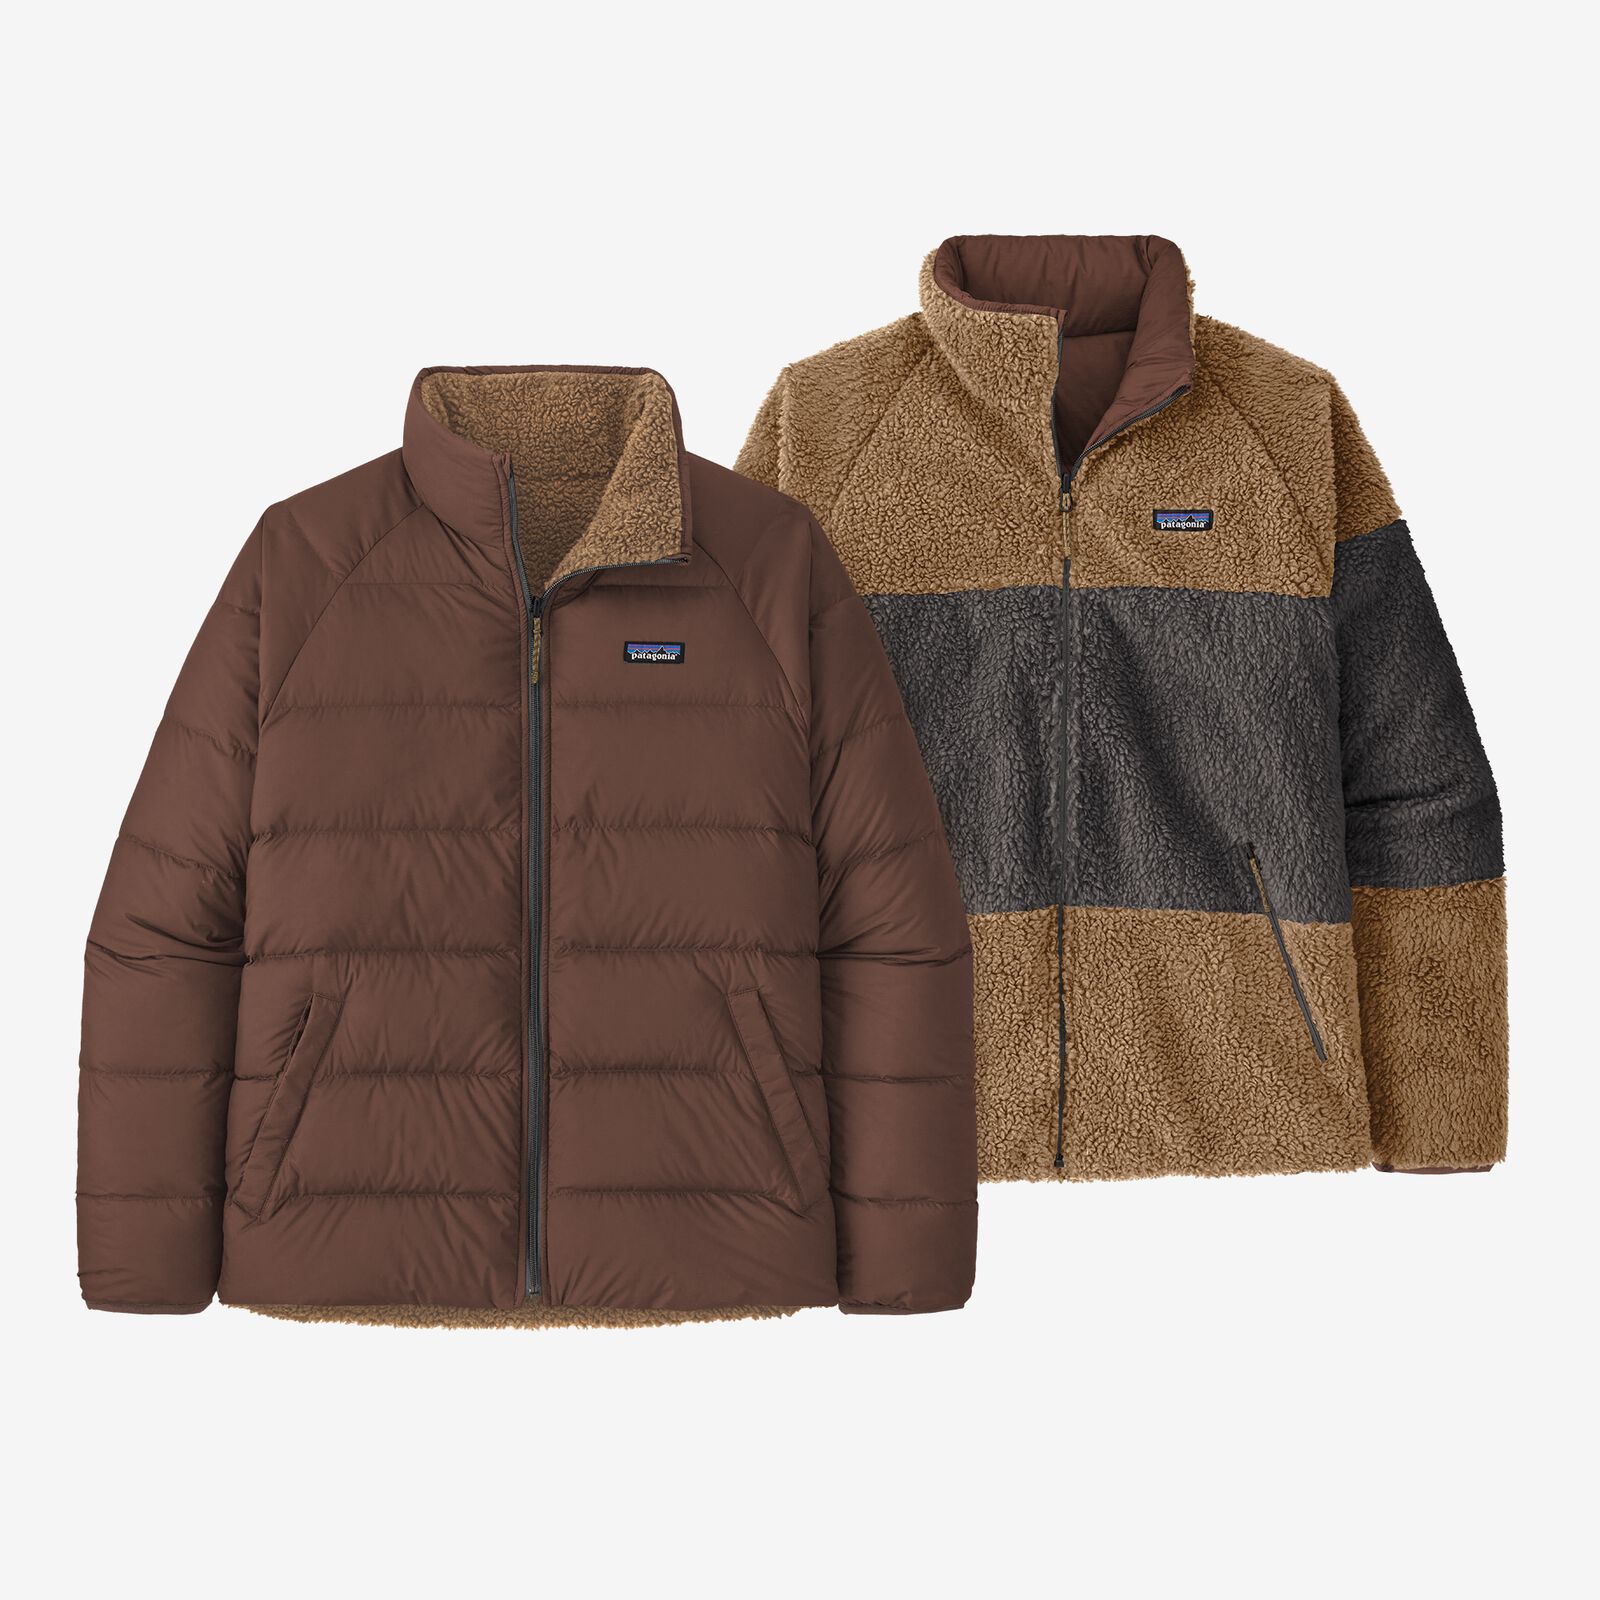 OUTLET】Patagonia パタゴニア メンズ・リバーシブル・サイレント